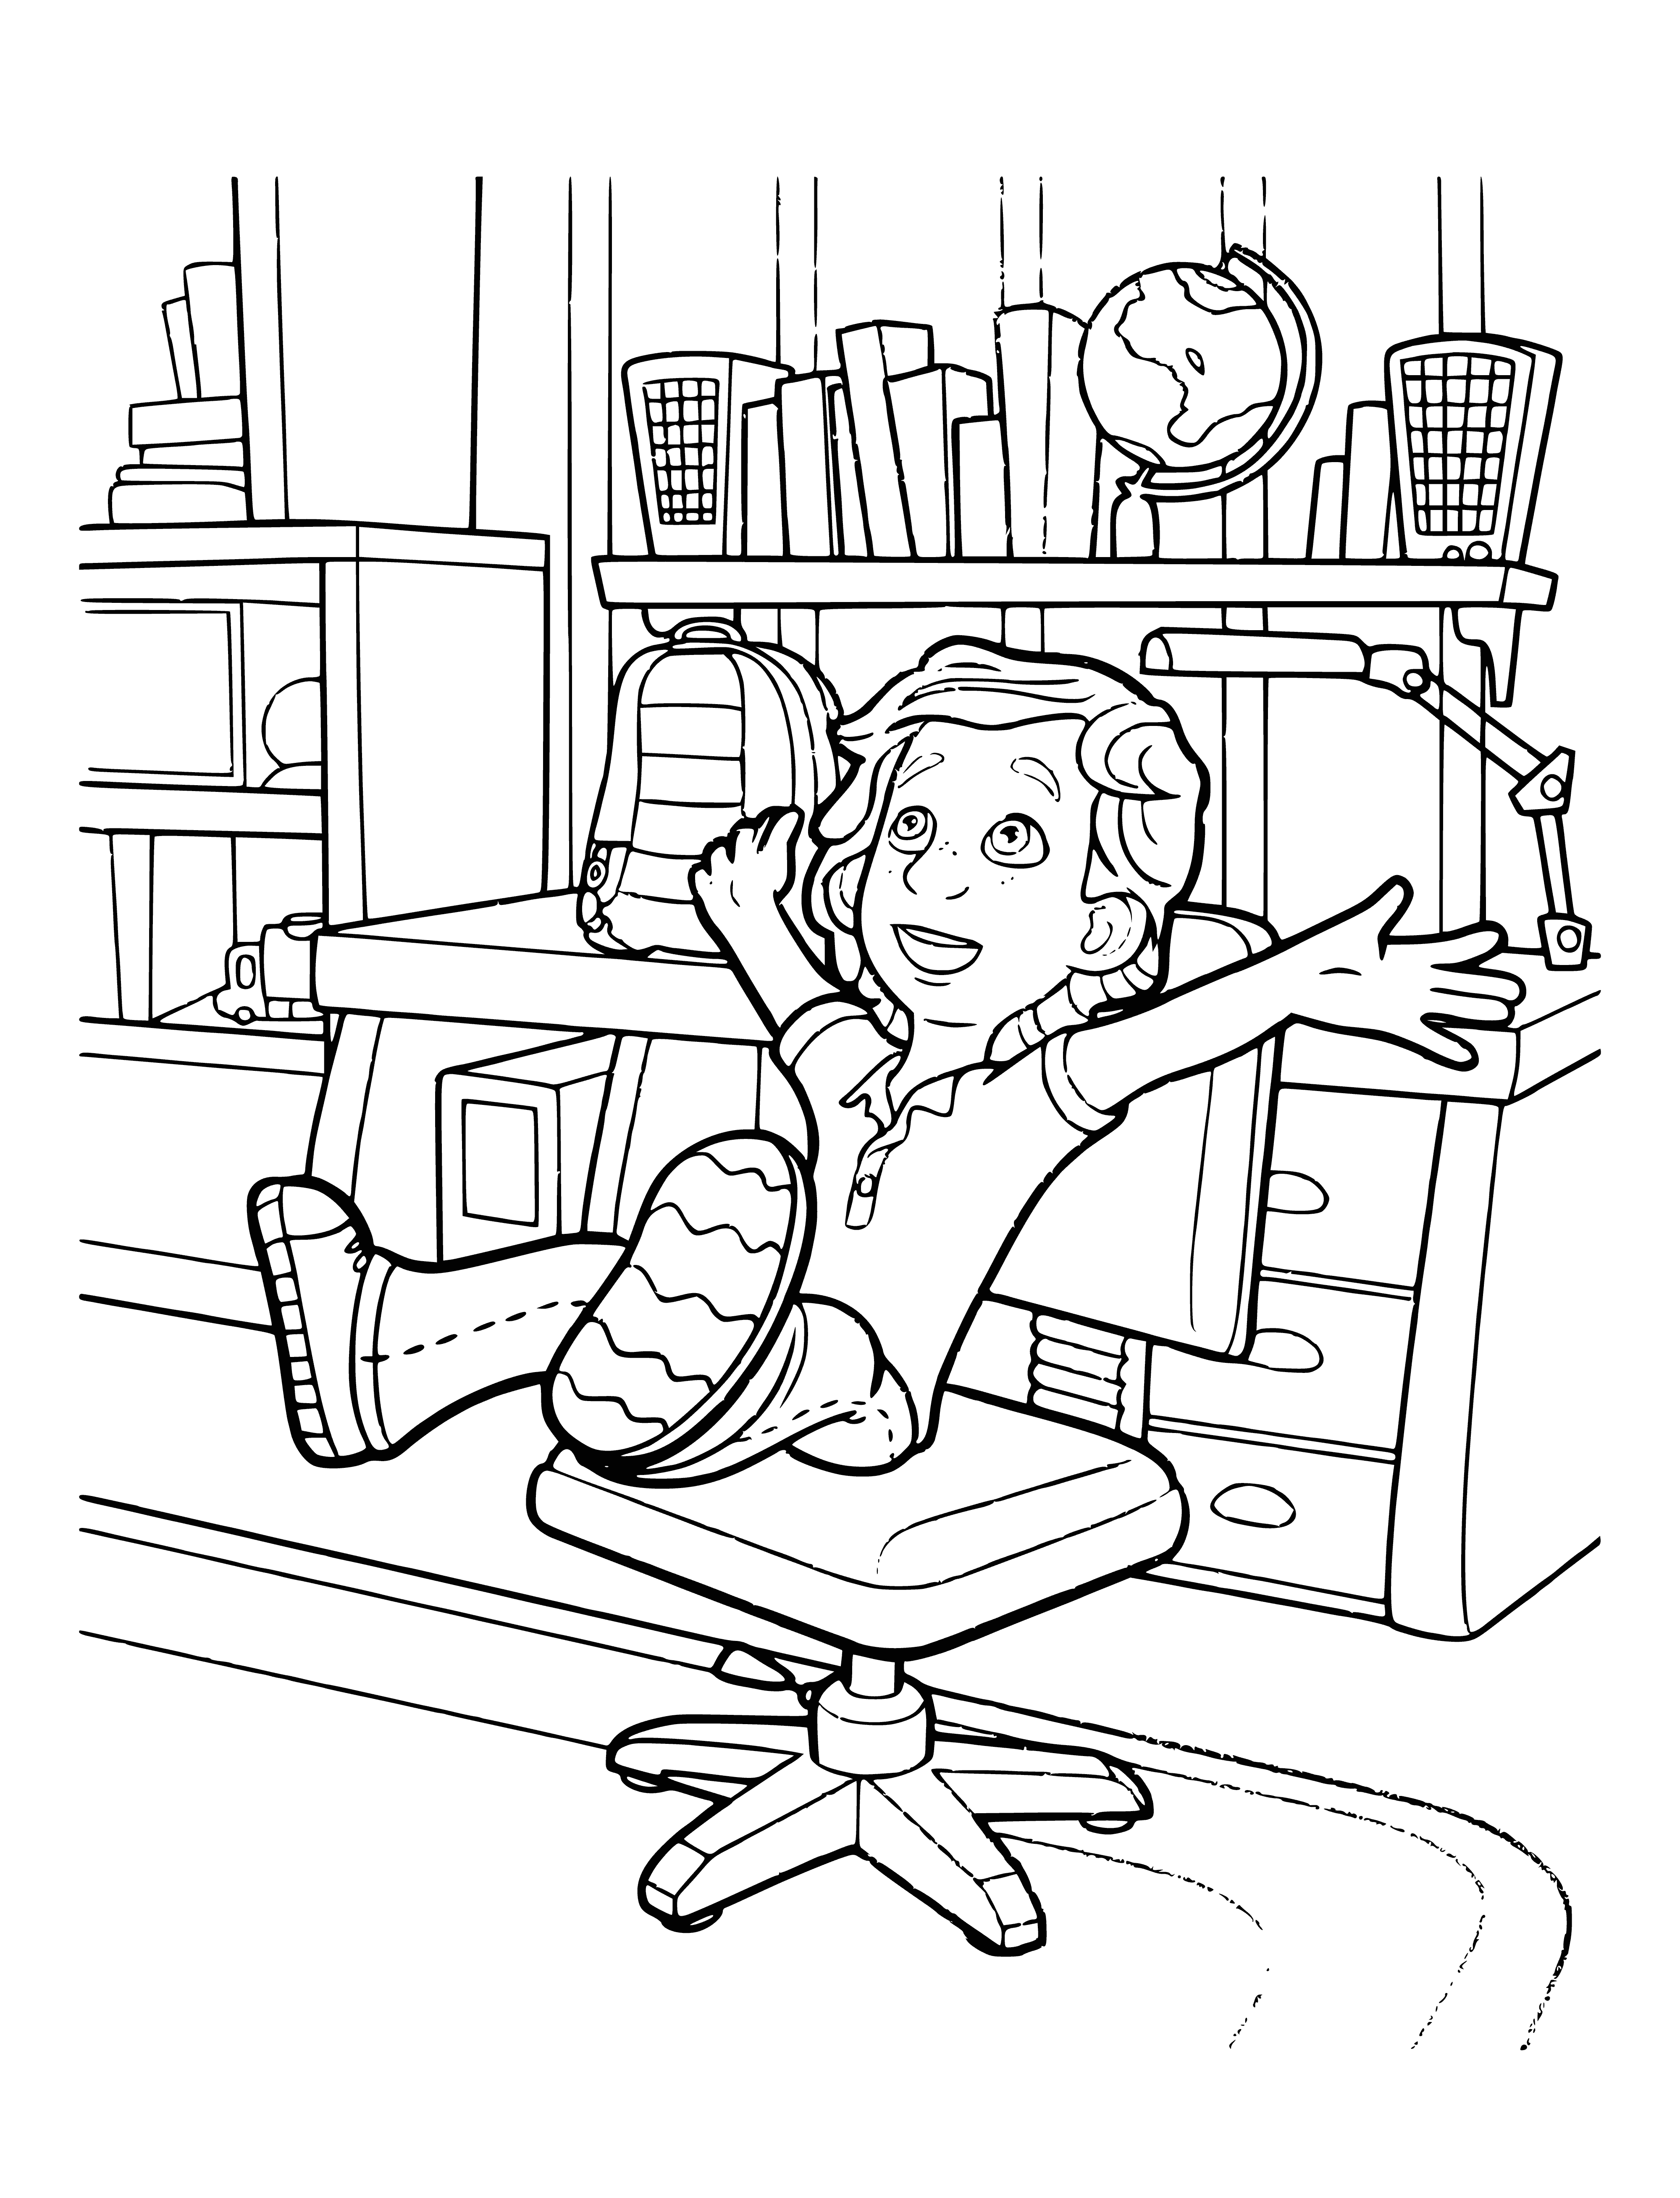 coloring page: Dimych sits on a chair with a blue shirt and a brown backpack. His feet are bare and he holds a black and white cat in his lap.